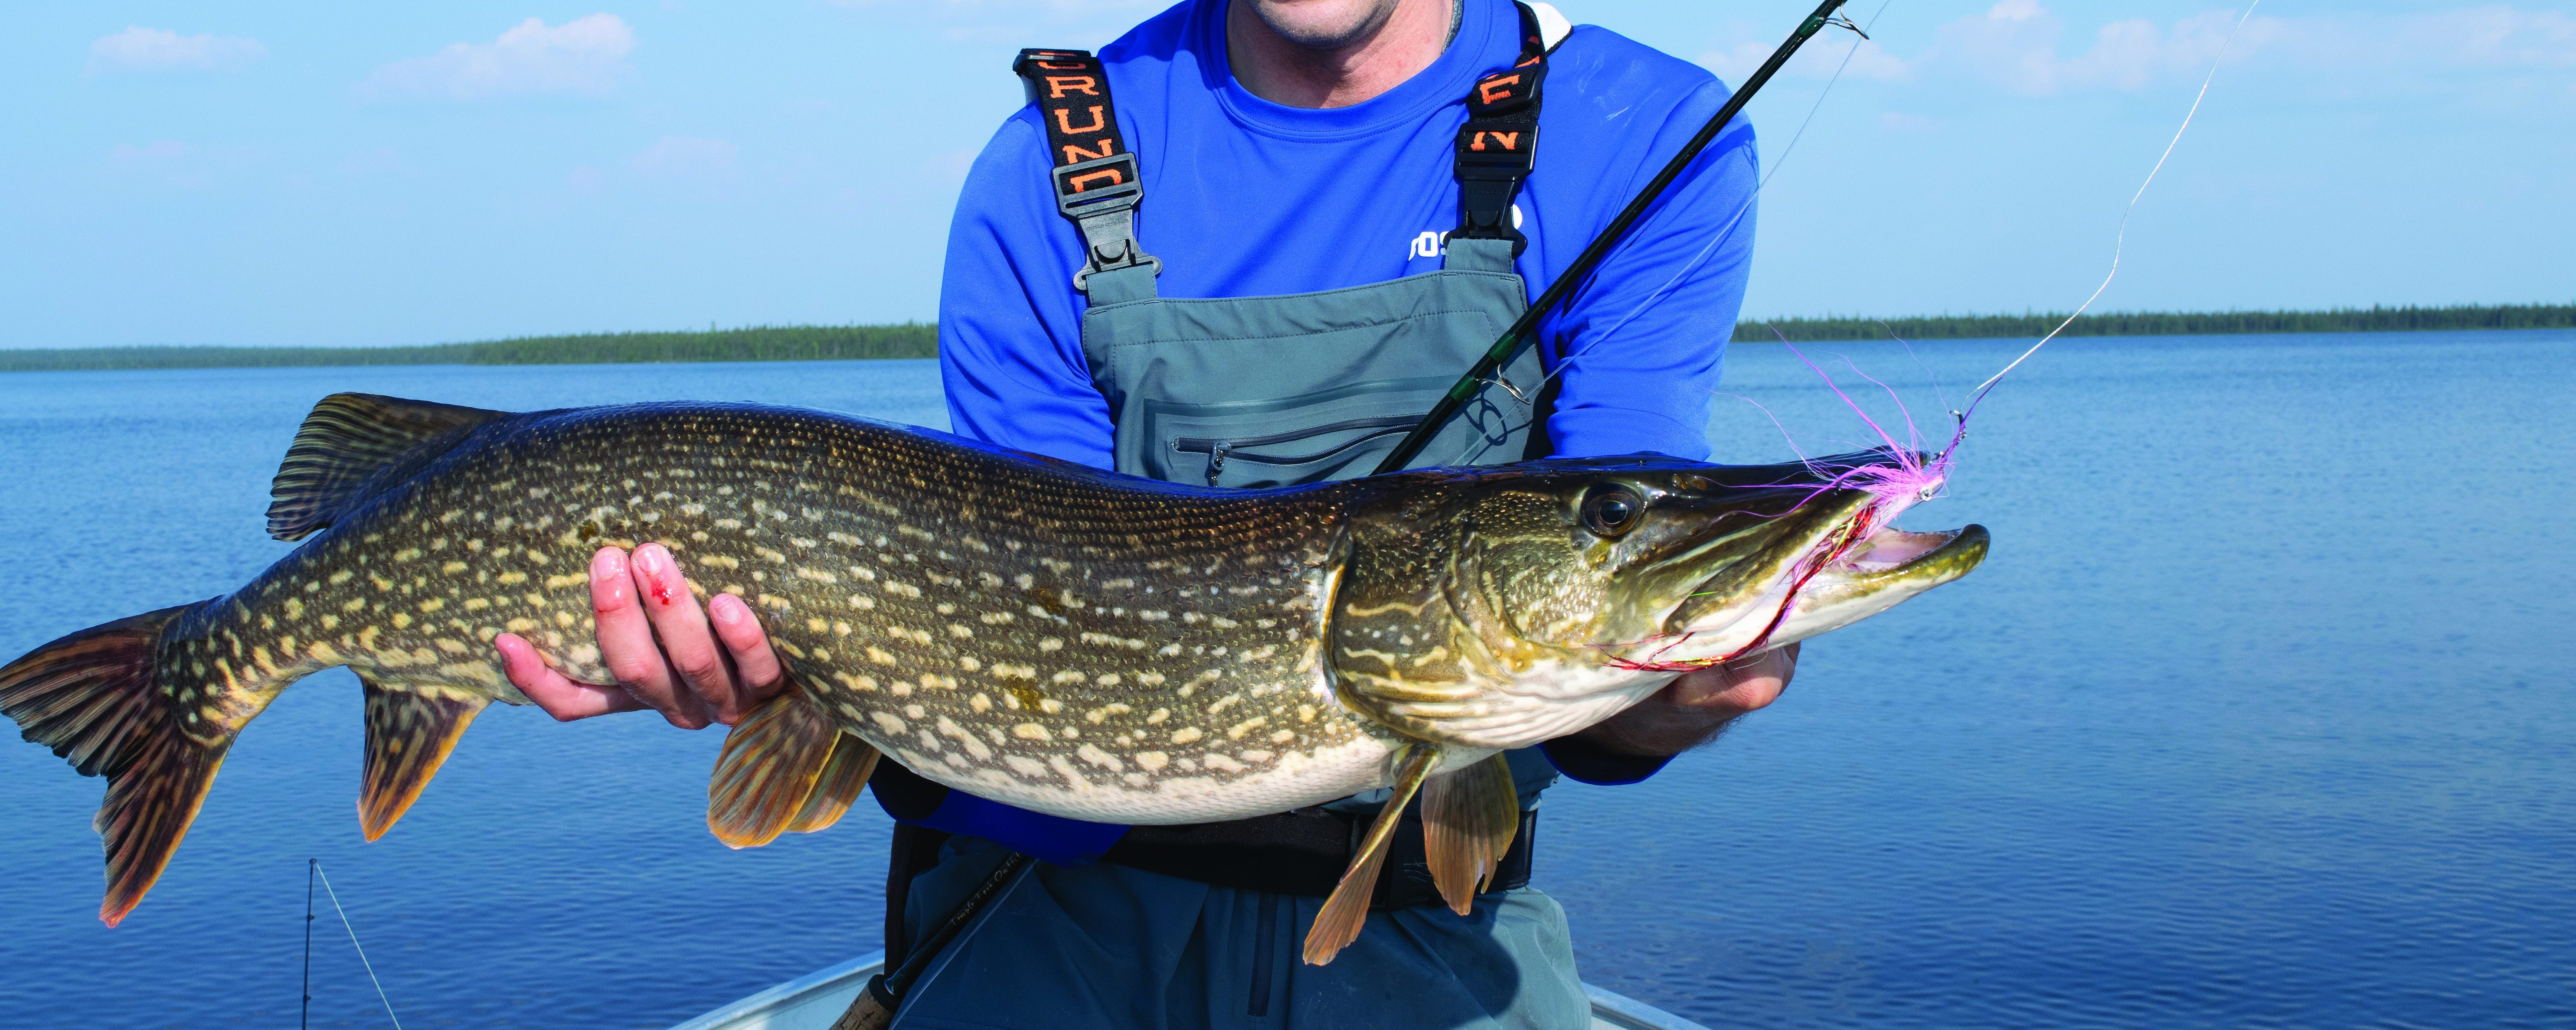 Saskatchewan Pike on the Fly - On The Water